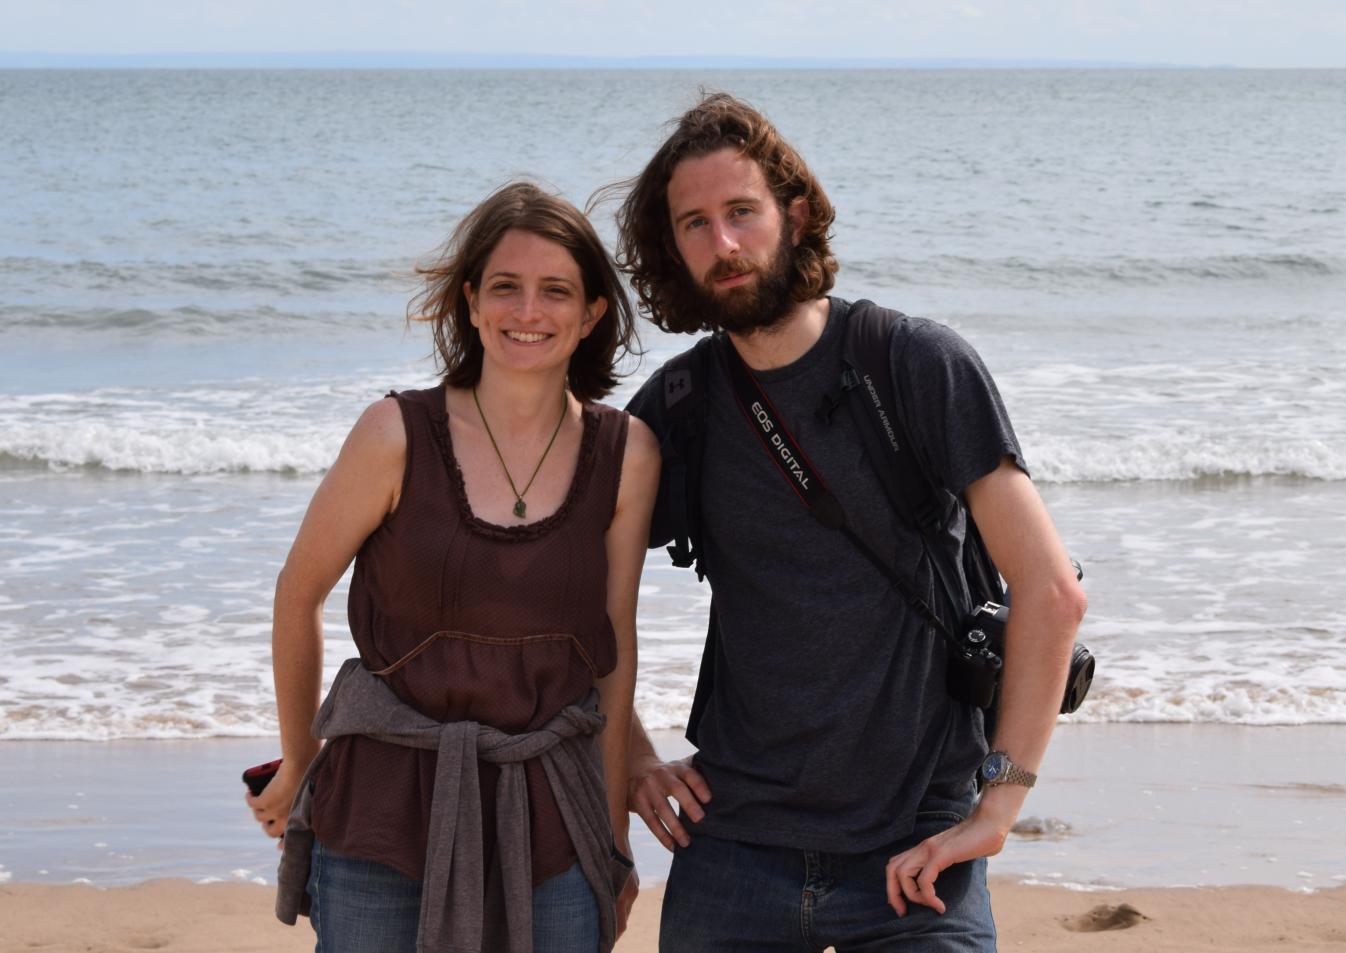 Saturday 30th July, Britt & Andy at Tor Bay, Gower.